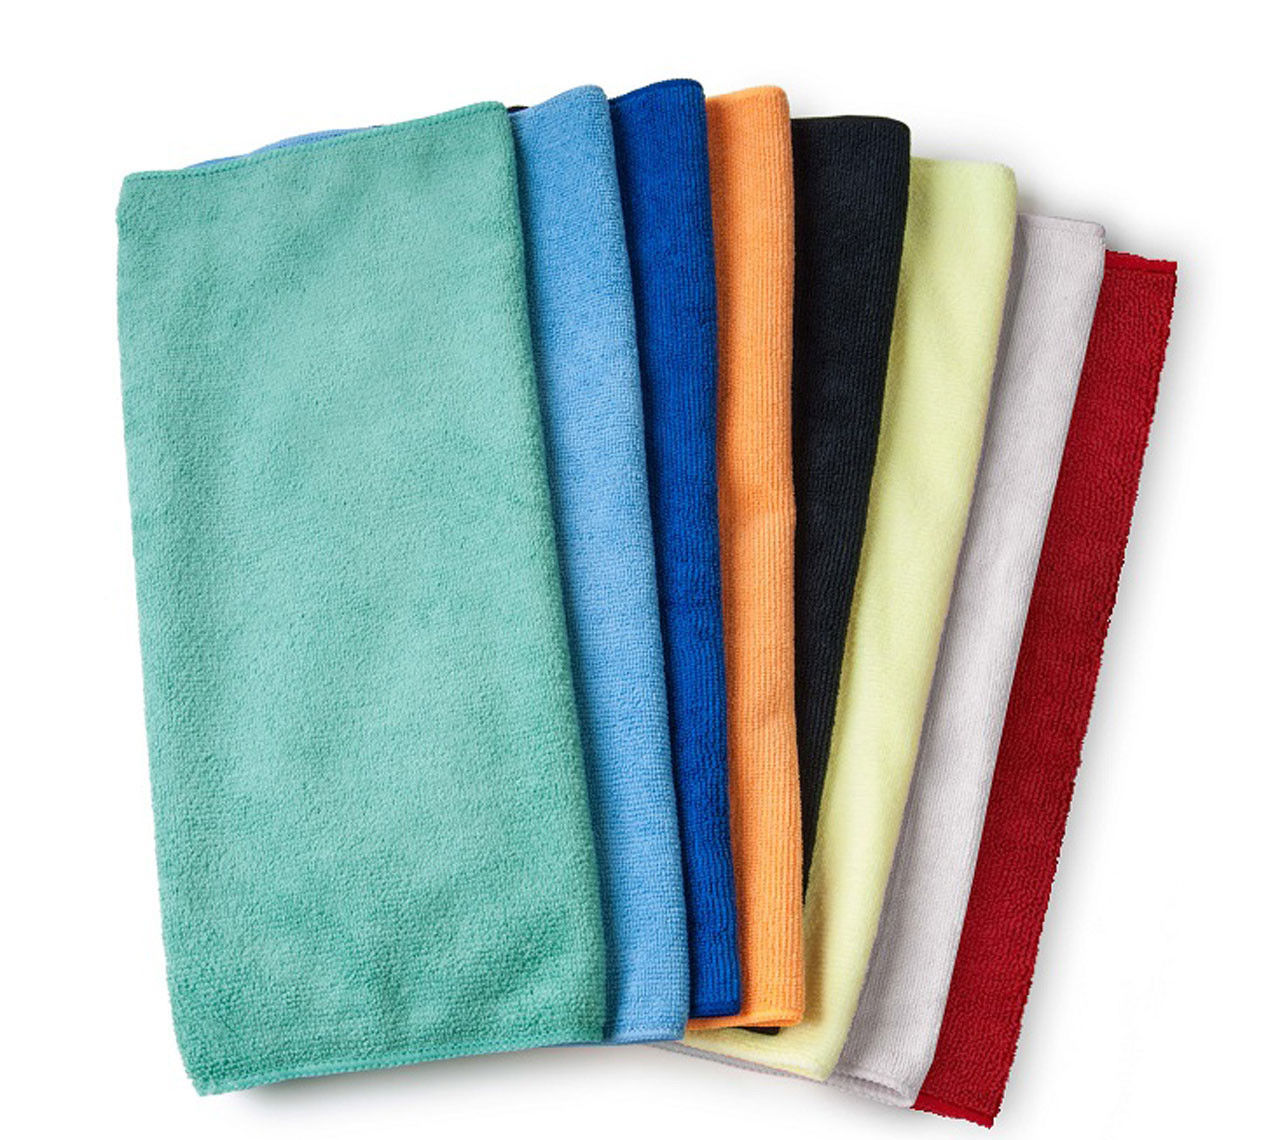 What is the significance of 300 GSM in bulk microfiber golf towels?